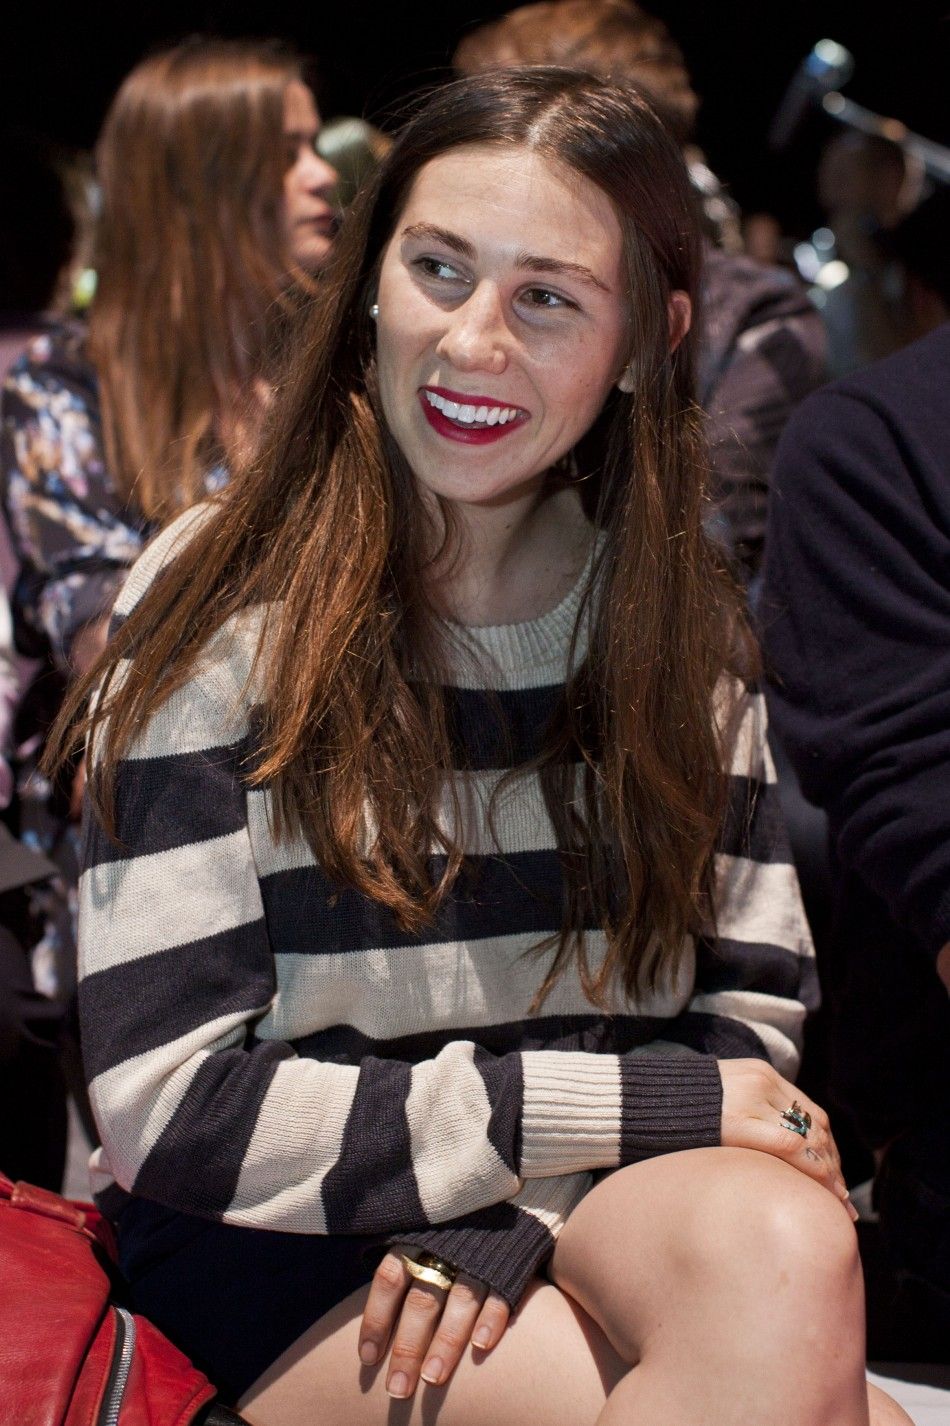 Actress Zosia Mamet is seen before the Marc by Marc Jacobs SpringSummer 2013 show during New York Fashion Week, September 11, 2012. 